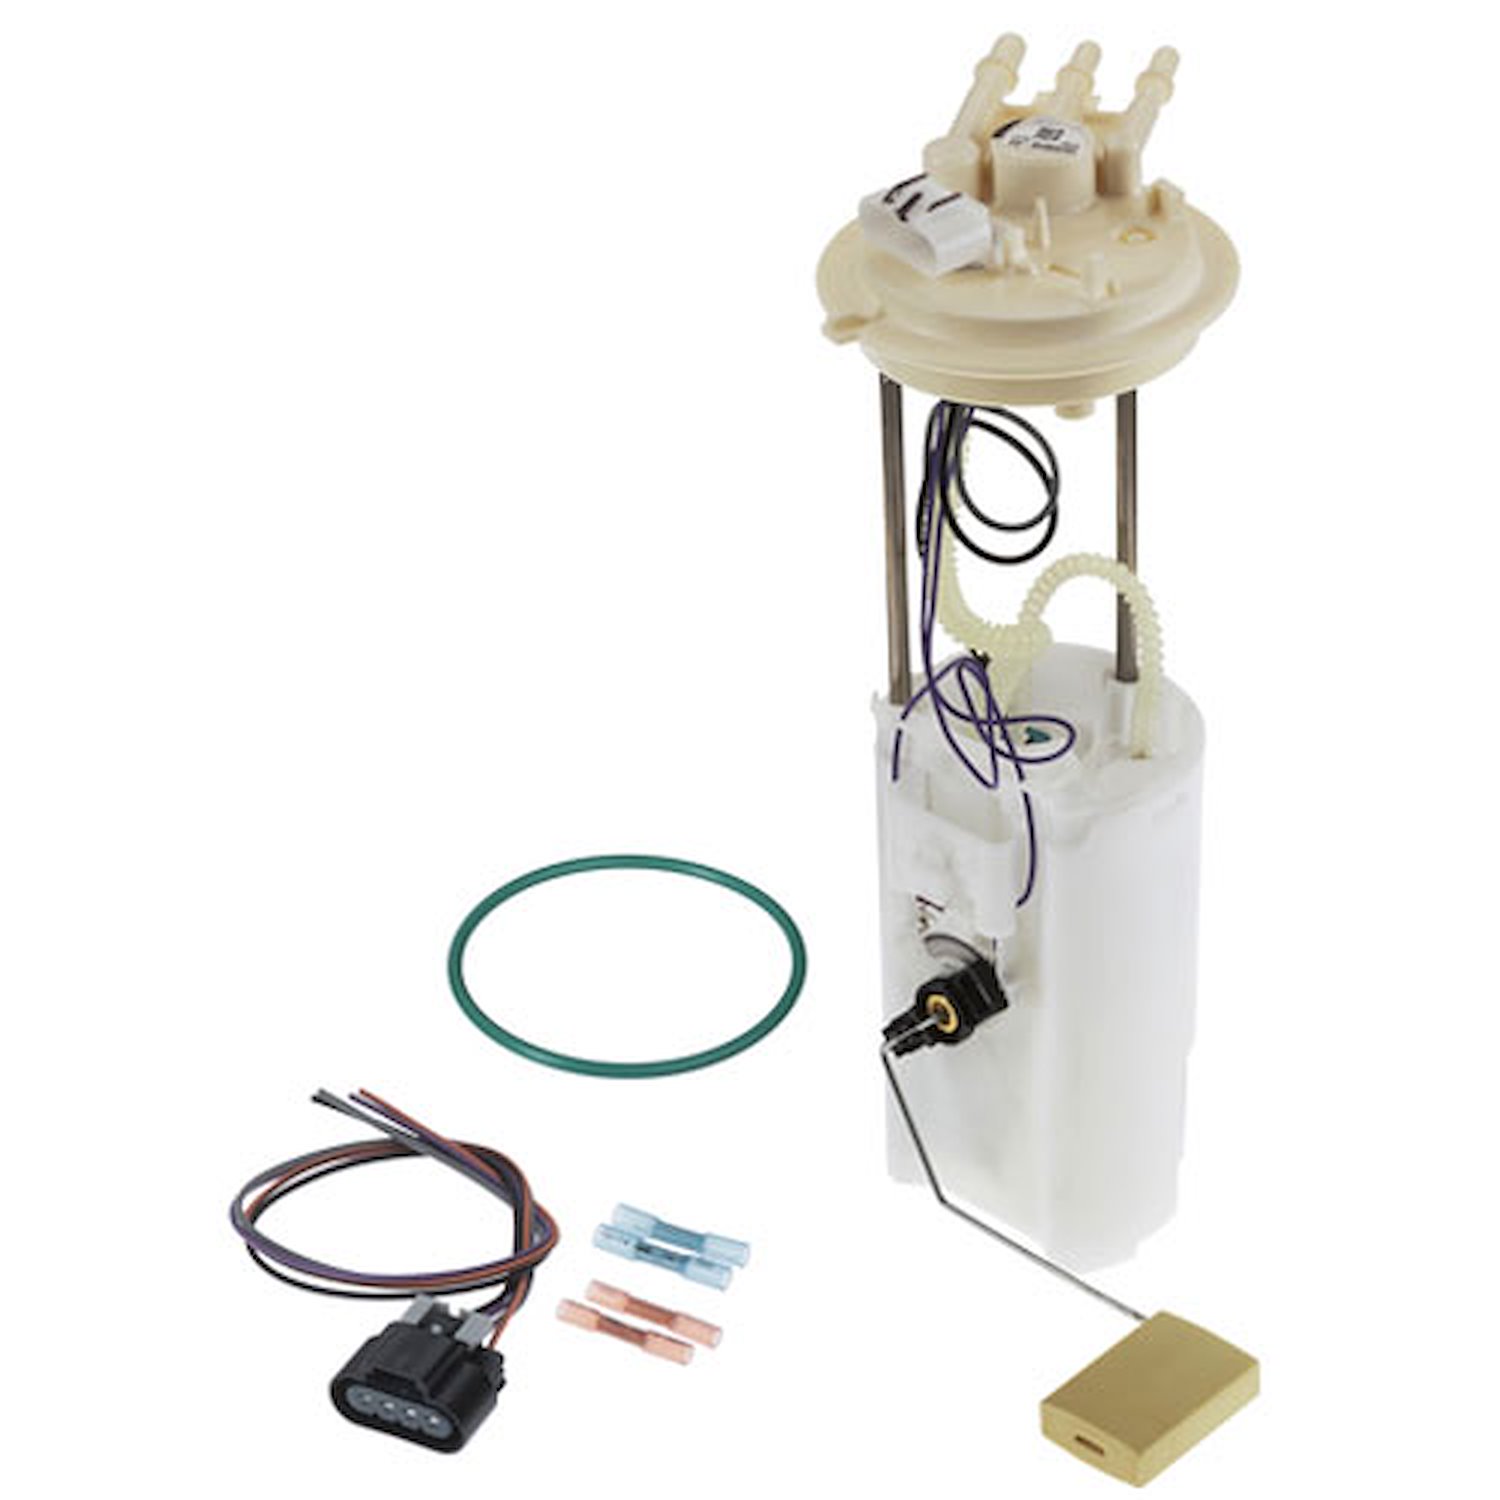 OE GM Replacement Electric Fuel Pump Module Assembly 1998-99 Chevrolet P30 5.7L V8